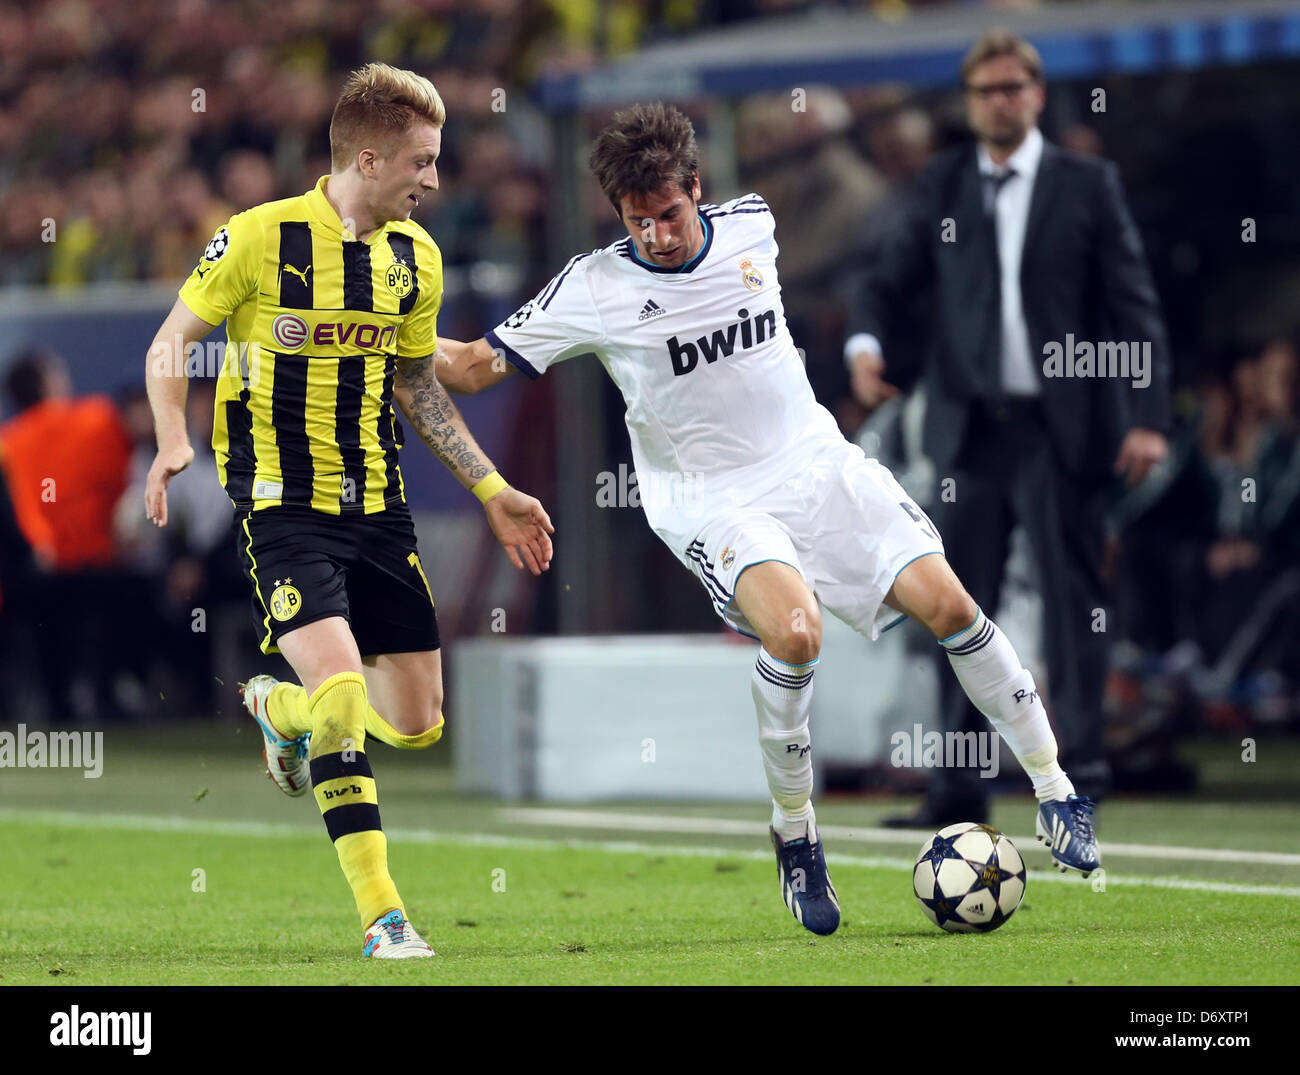 Dortmunds Marco Reus (L) and Madrid's Fabio Coentrao vie for the ball during the UEFA Champions League semi final first leg soccer match between Borussia Dortmund and Real Madrid at BVB stadium Dortmund in Dortmund, Germany, 24 April 2013. Photo: Friso Gentsch/dpa Stock Photo